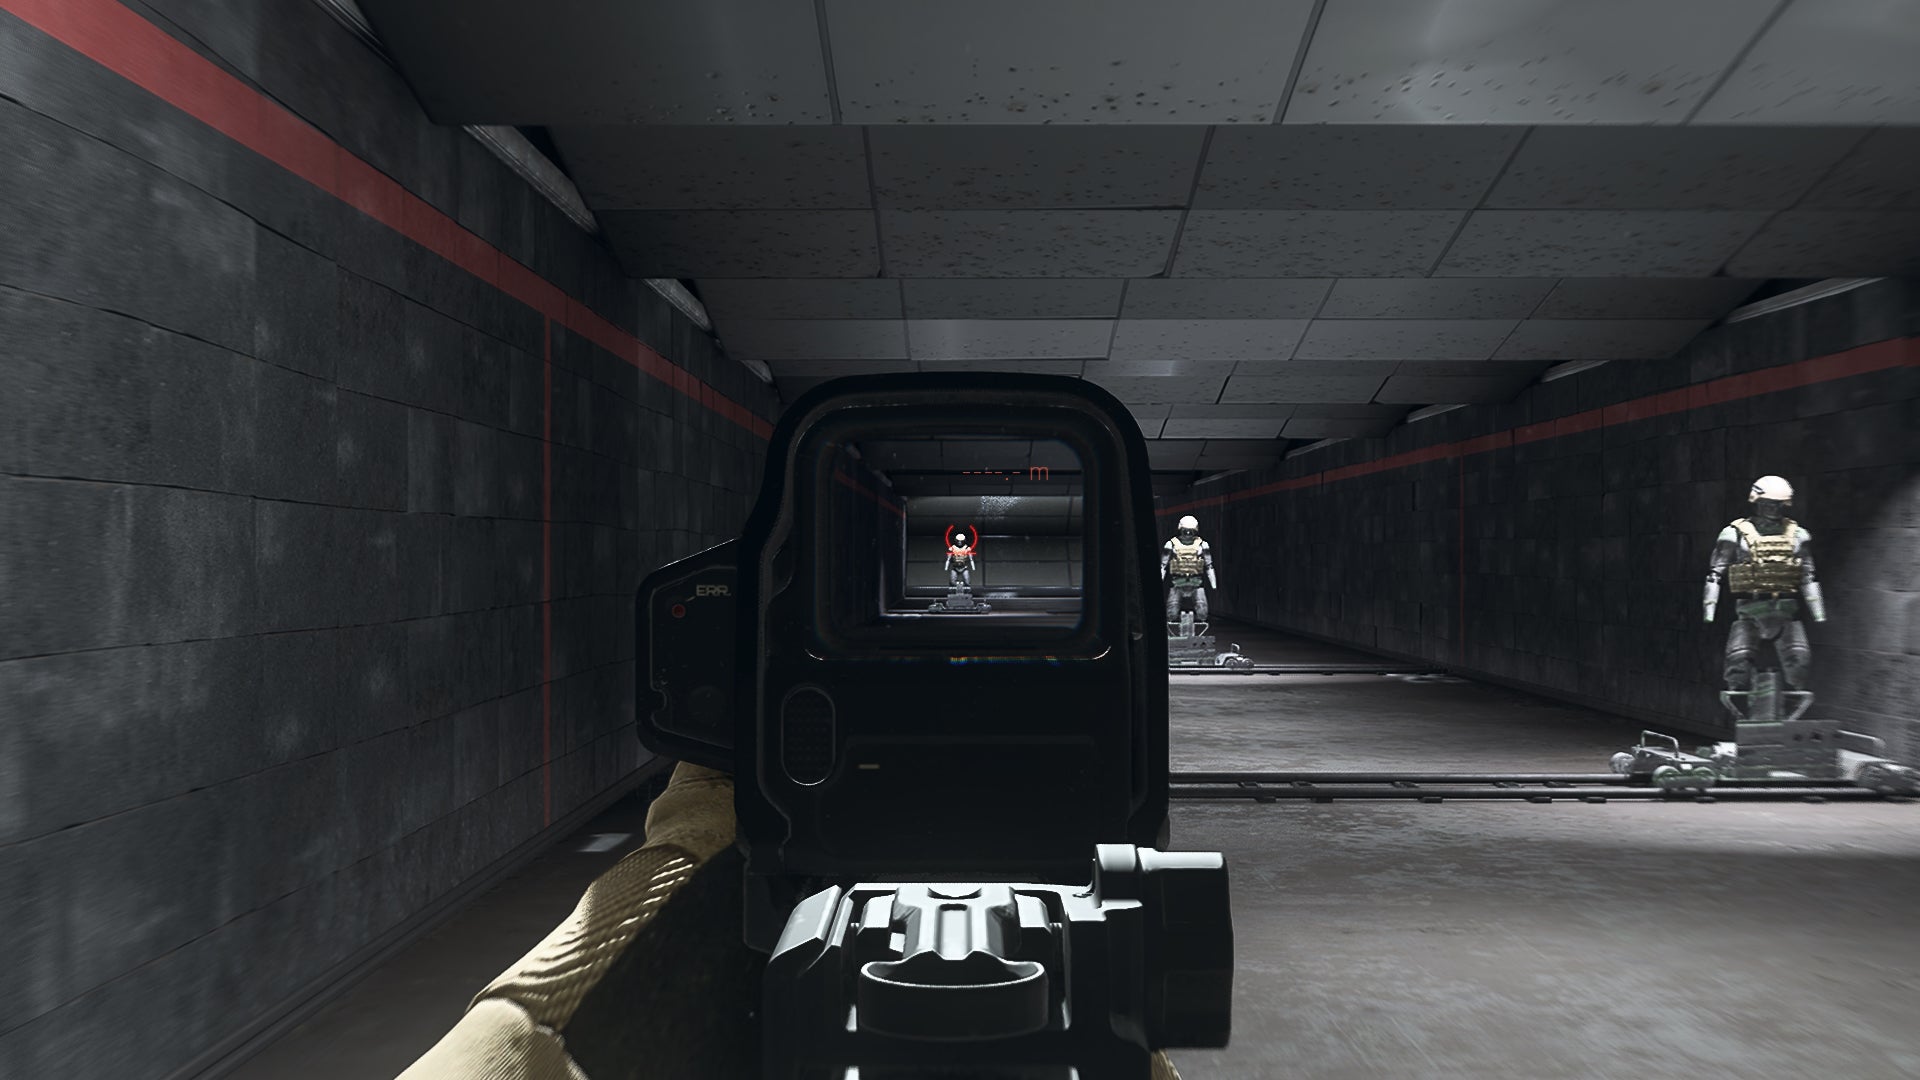 The player in Warzone 2.0 aims at a training dummy using the XTEN Angel 40 optic attachment.